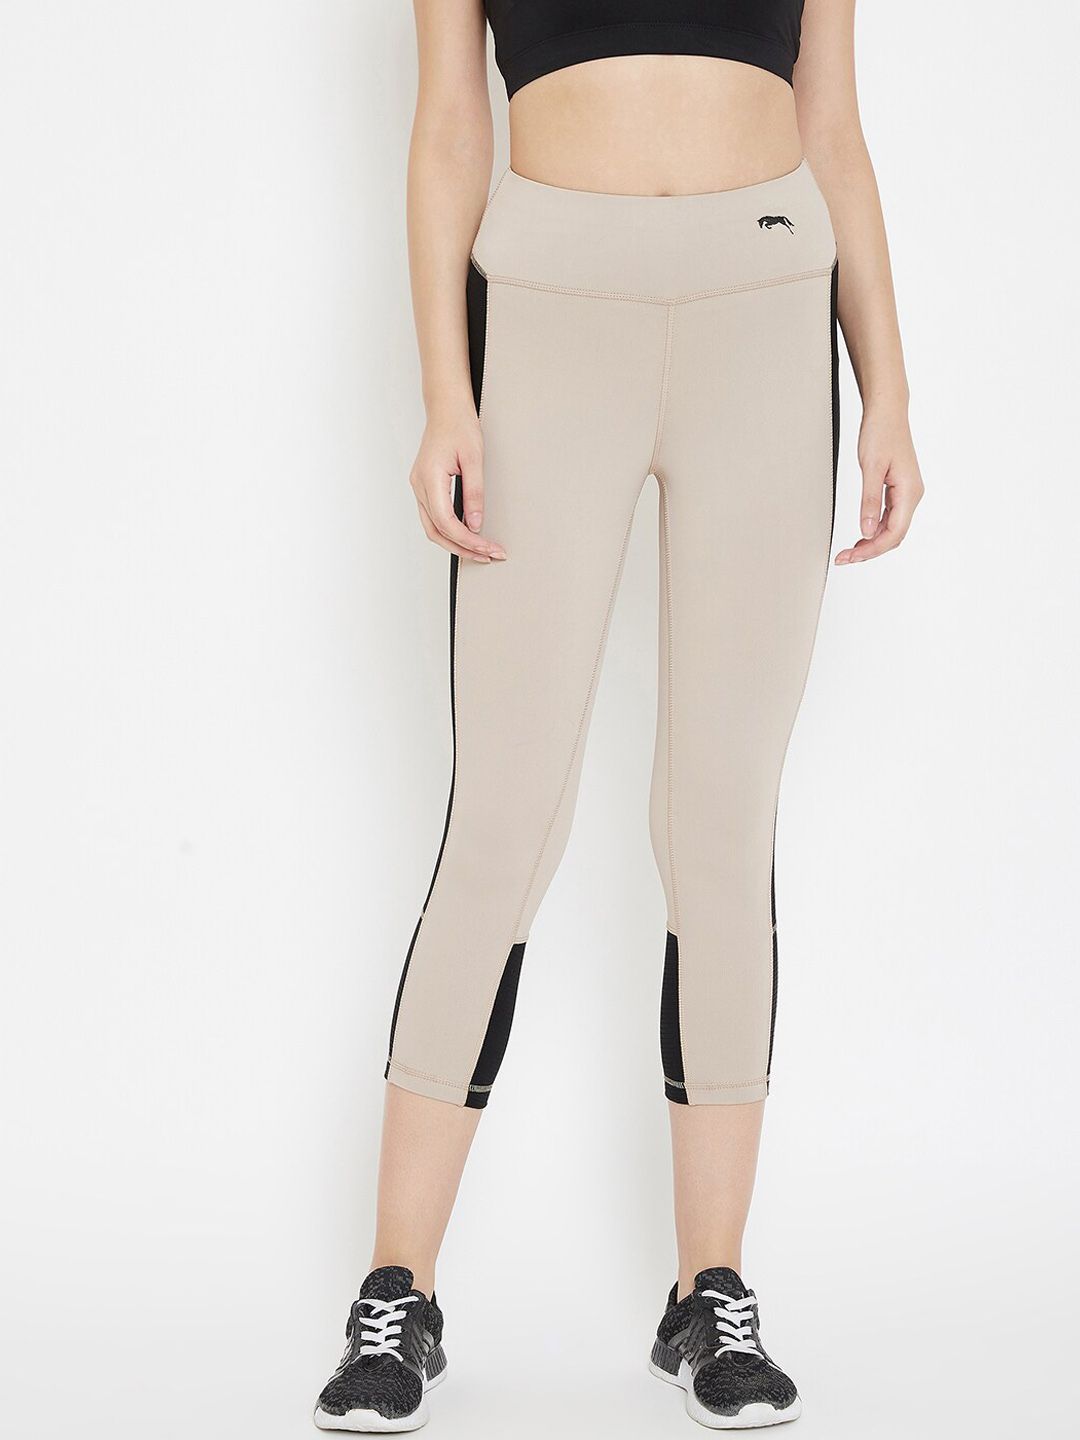 JUMP USA Women Beige & Black Colourblocked Activewear Gym Tights Price in India